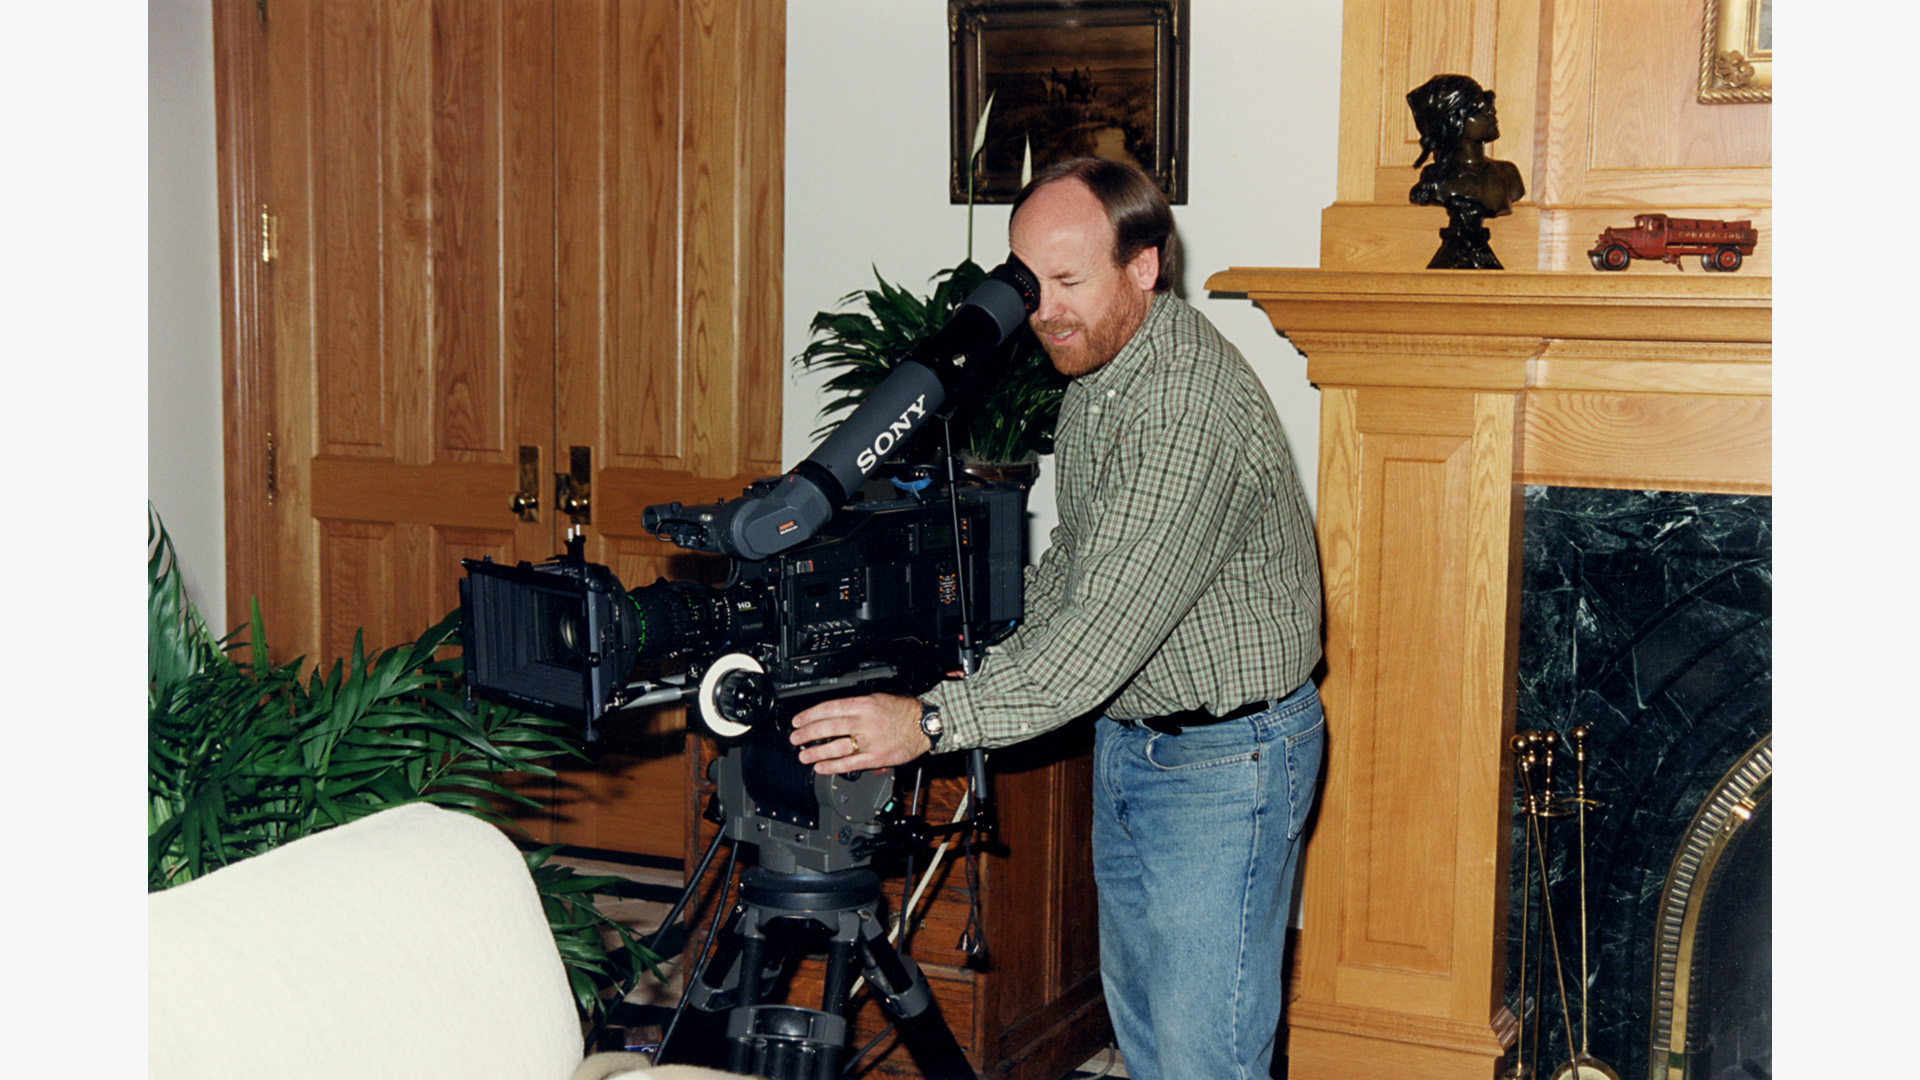 Mike Blanchard with a Sony camera.